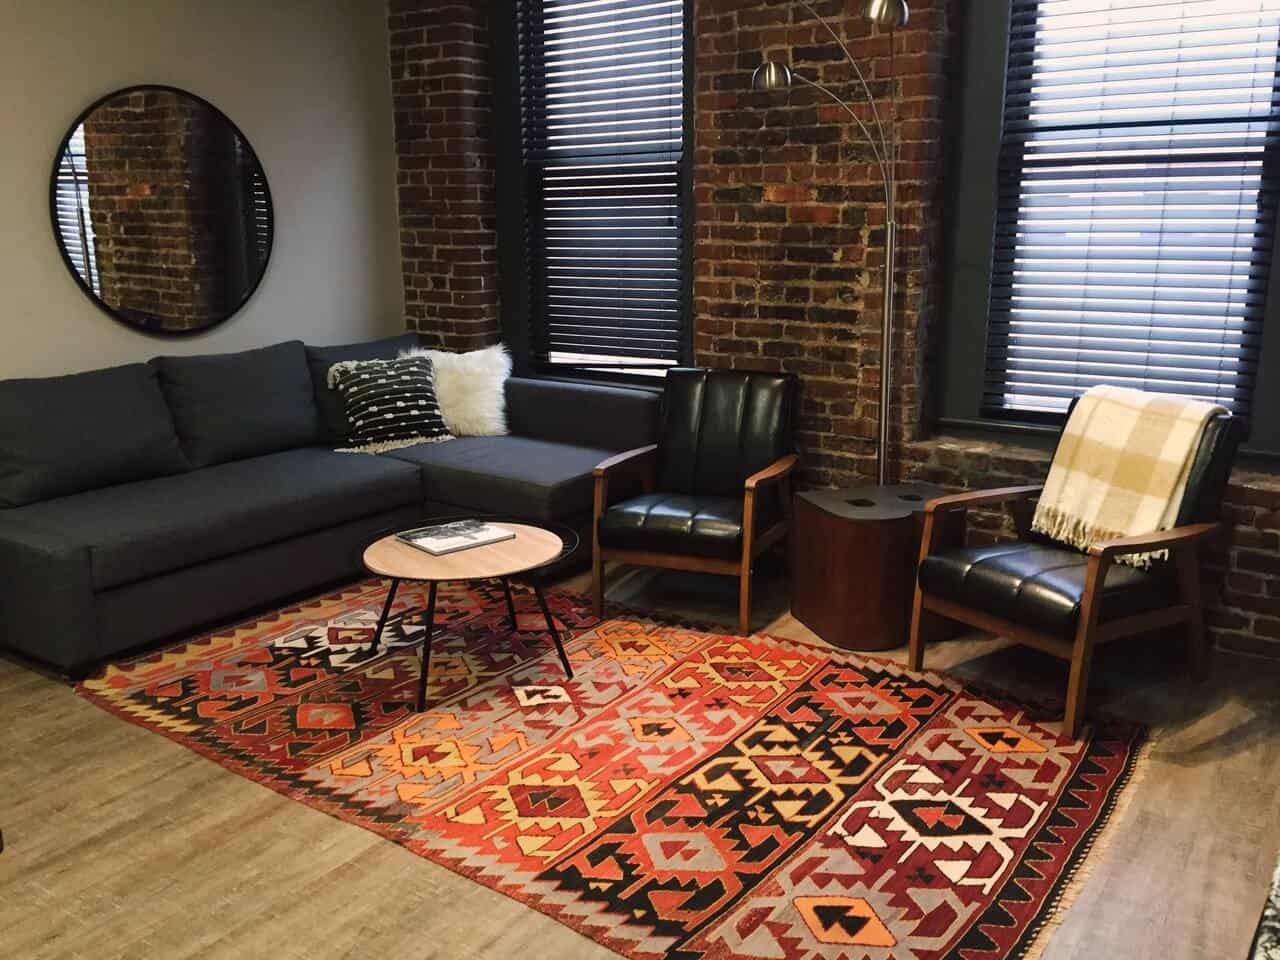 Image of Airbnb rental in Nashville, Tennessee